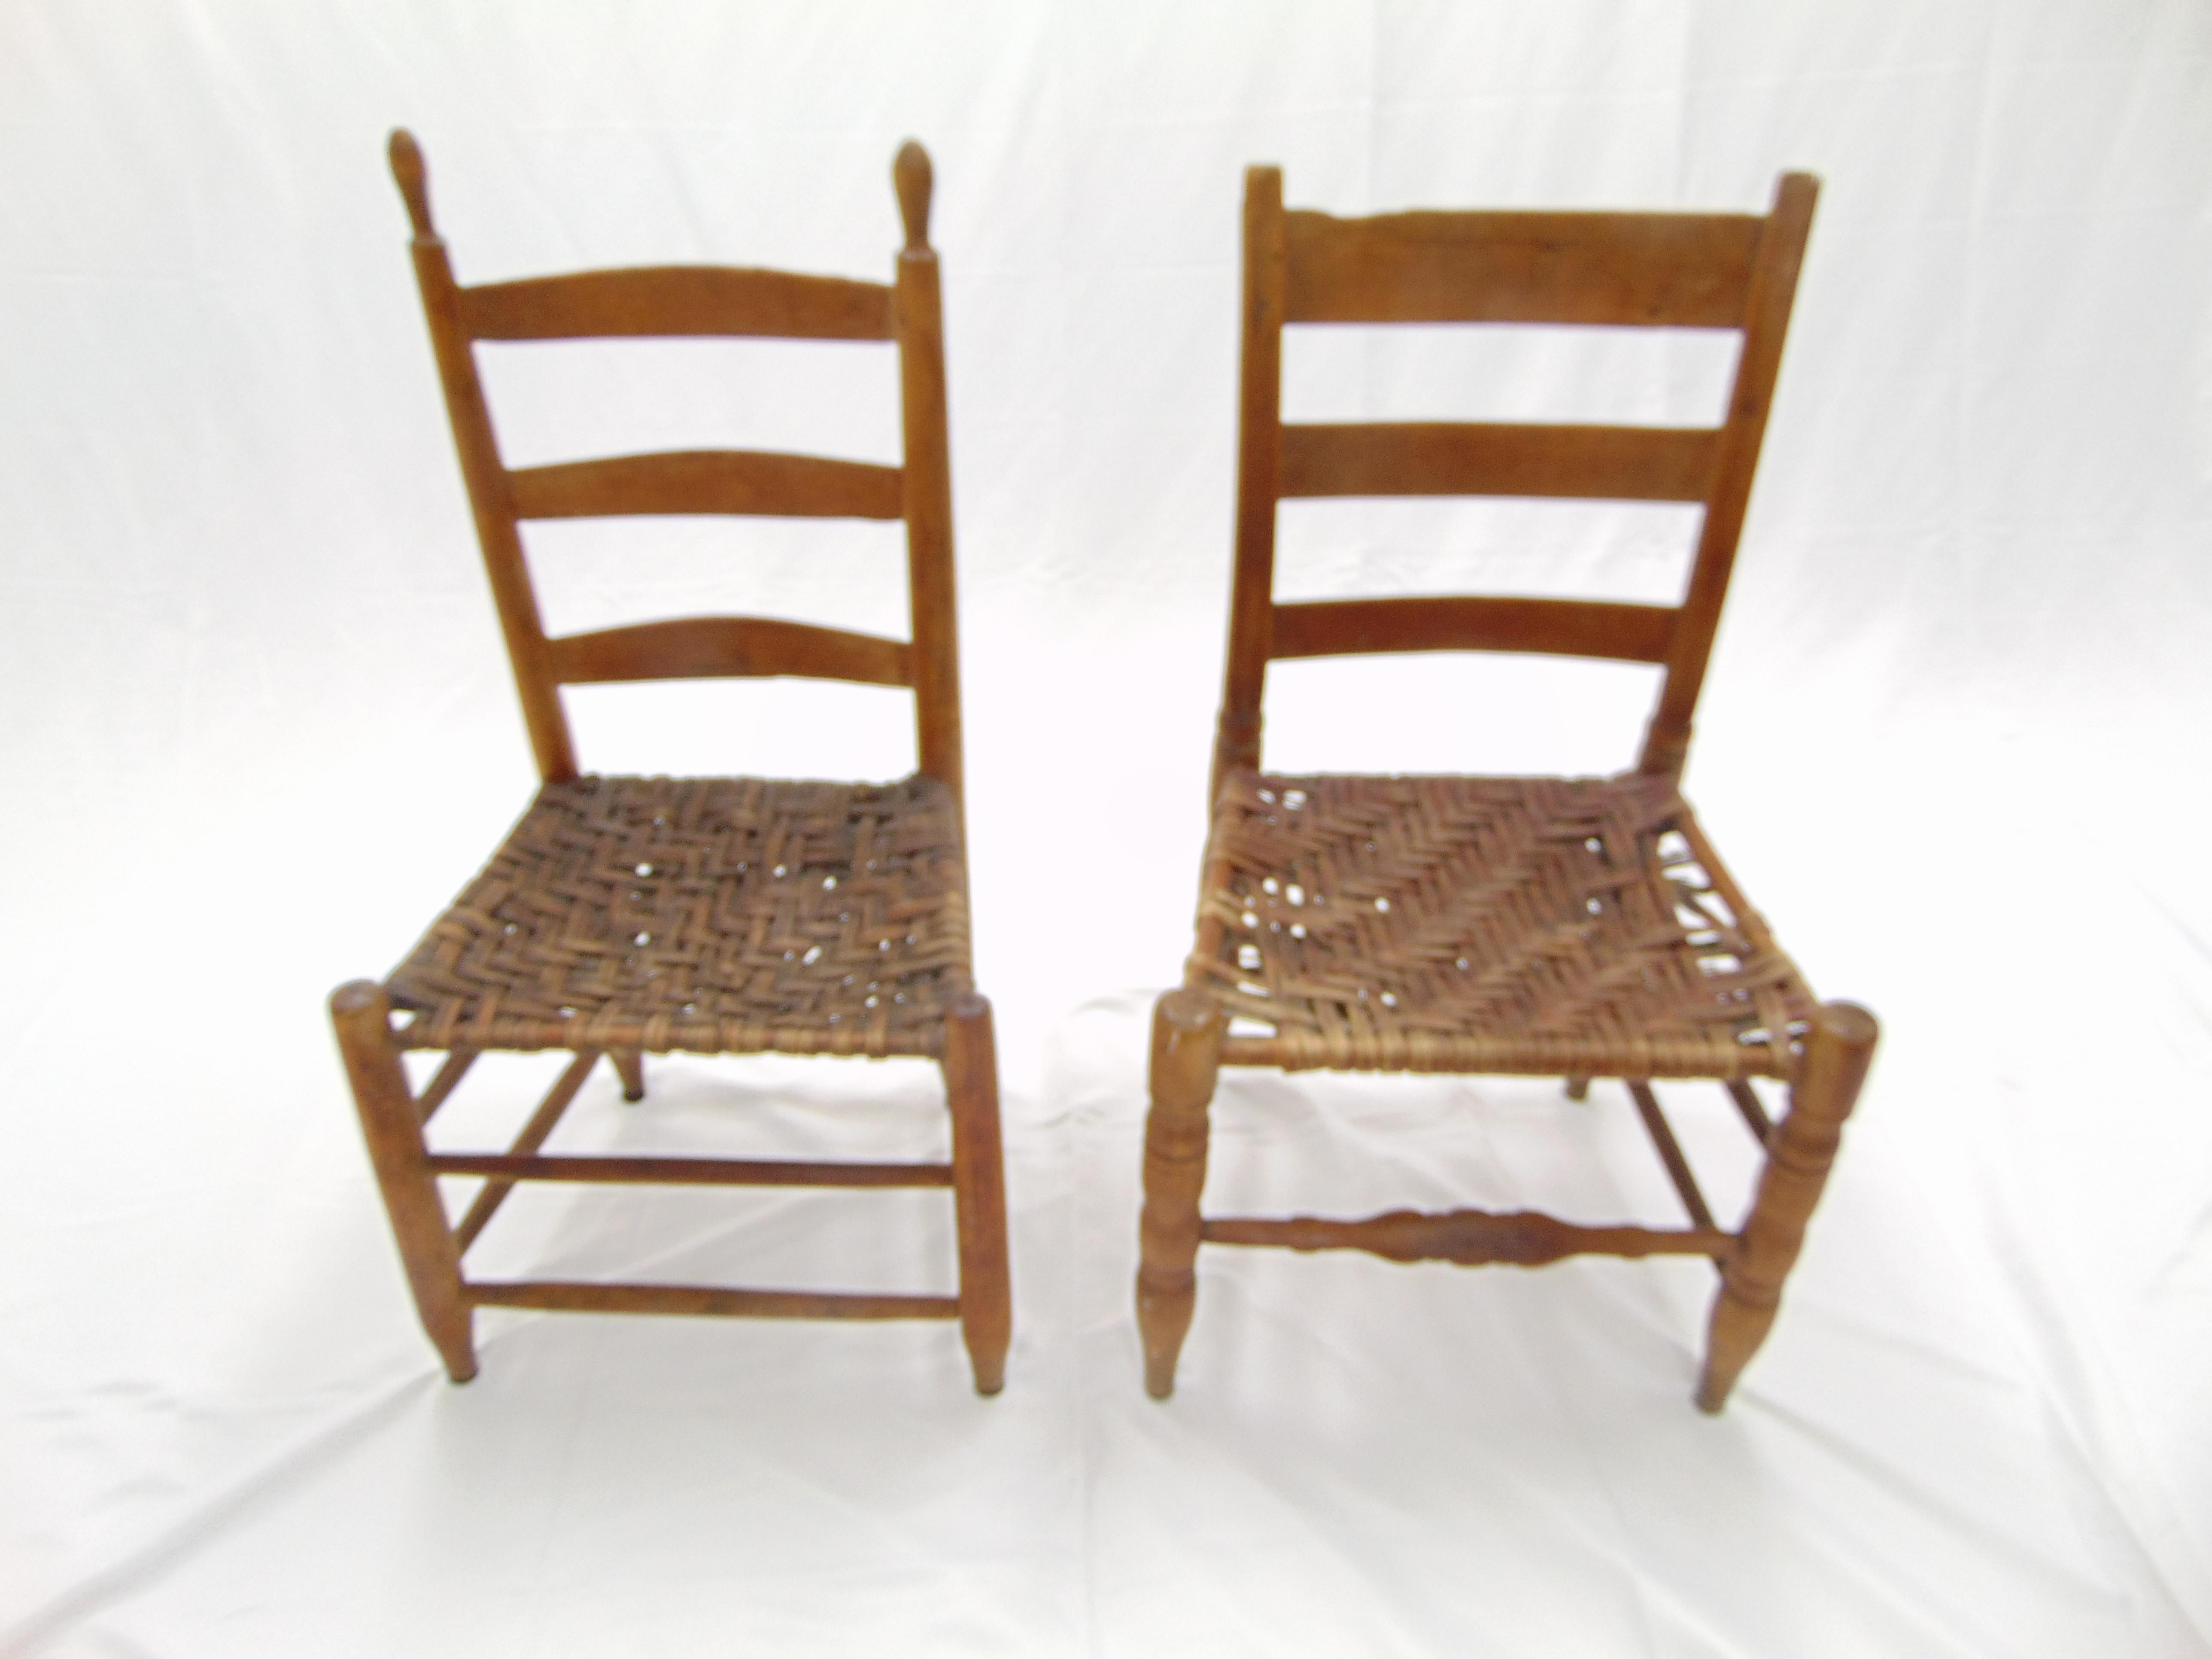 These are a pair of slightly different antique Primitive ladder back chairs. Even though they are different because of their size and age they go together perfectly! These chairs are from the 19th century and are American in style and make. They